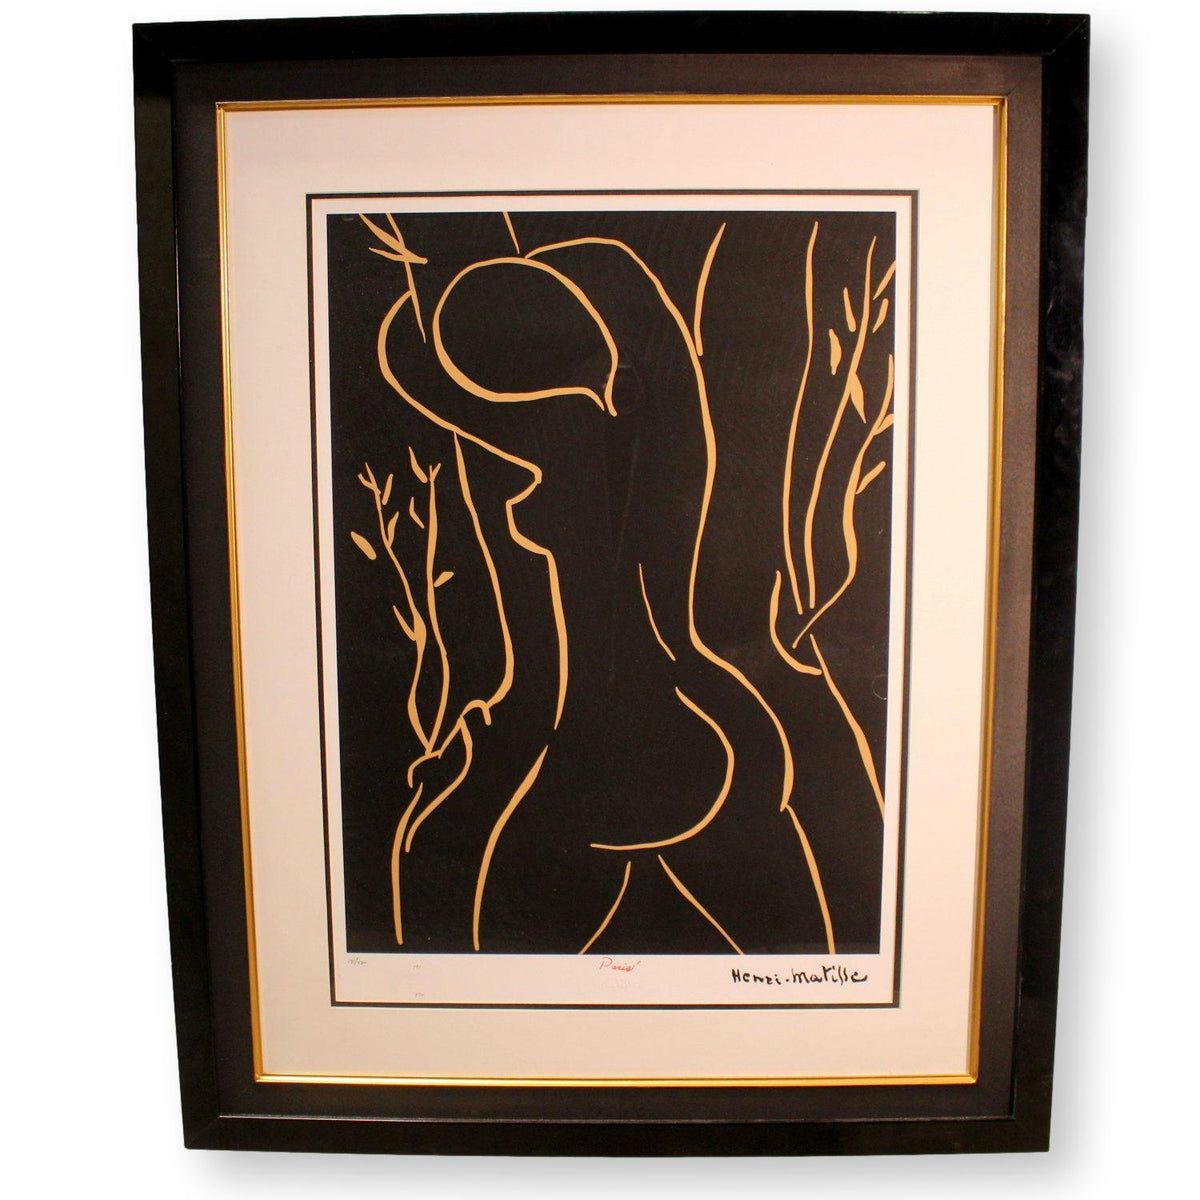 "Pasiphae Embracing an Olive Tree" by Henri Matisse